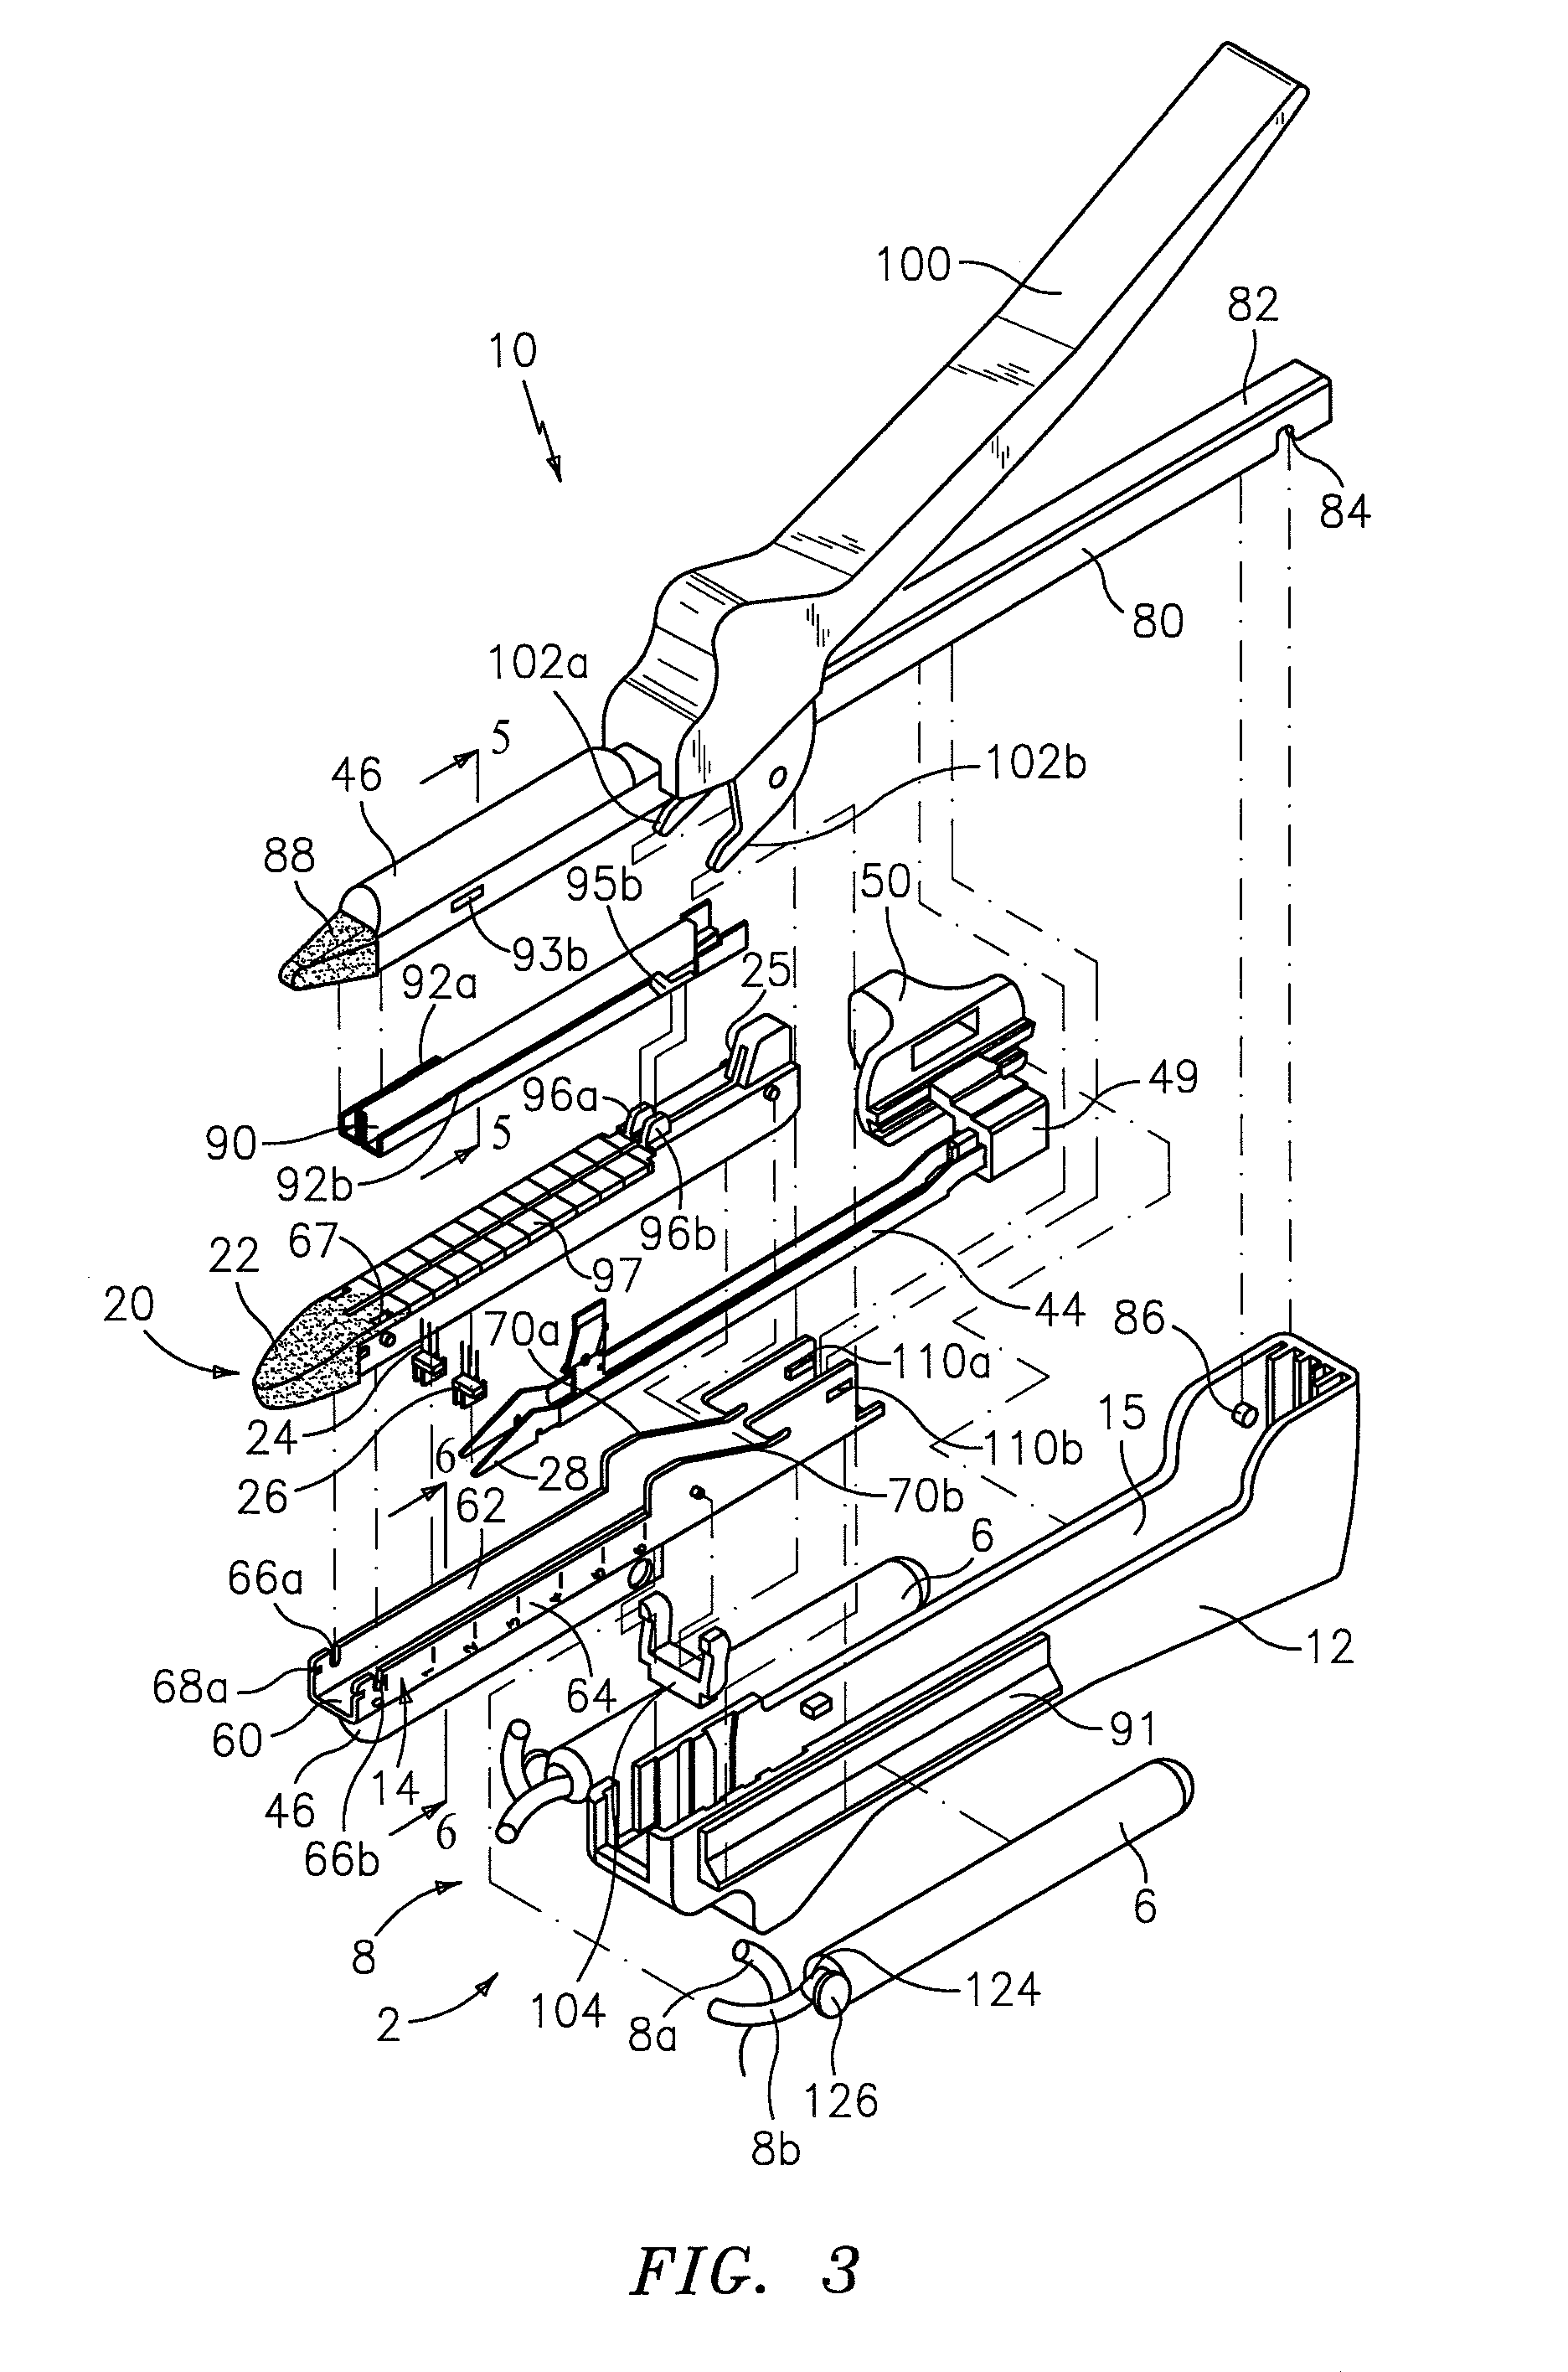 Apparatus for Applying Wound Treatment Material Using Tissue-Penetrating Needles